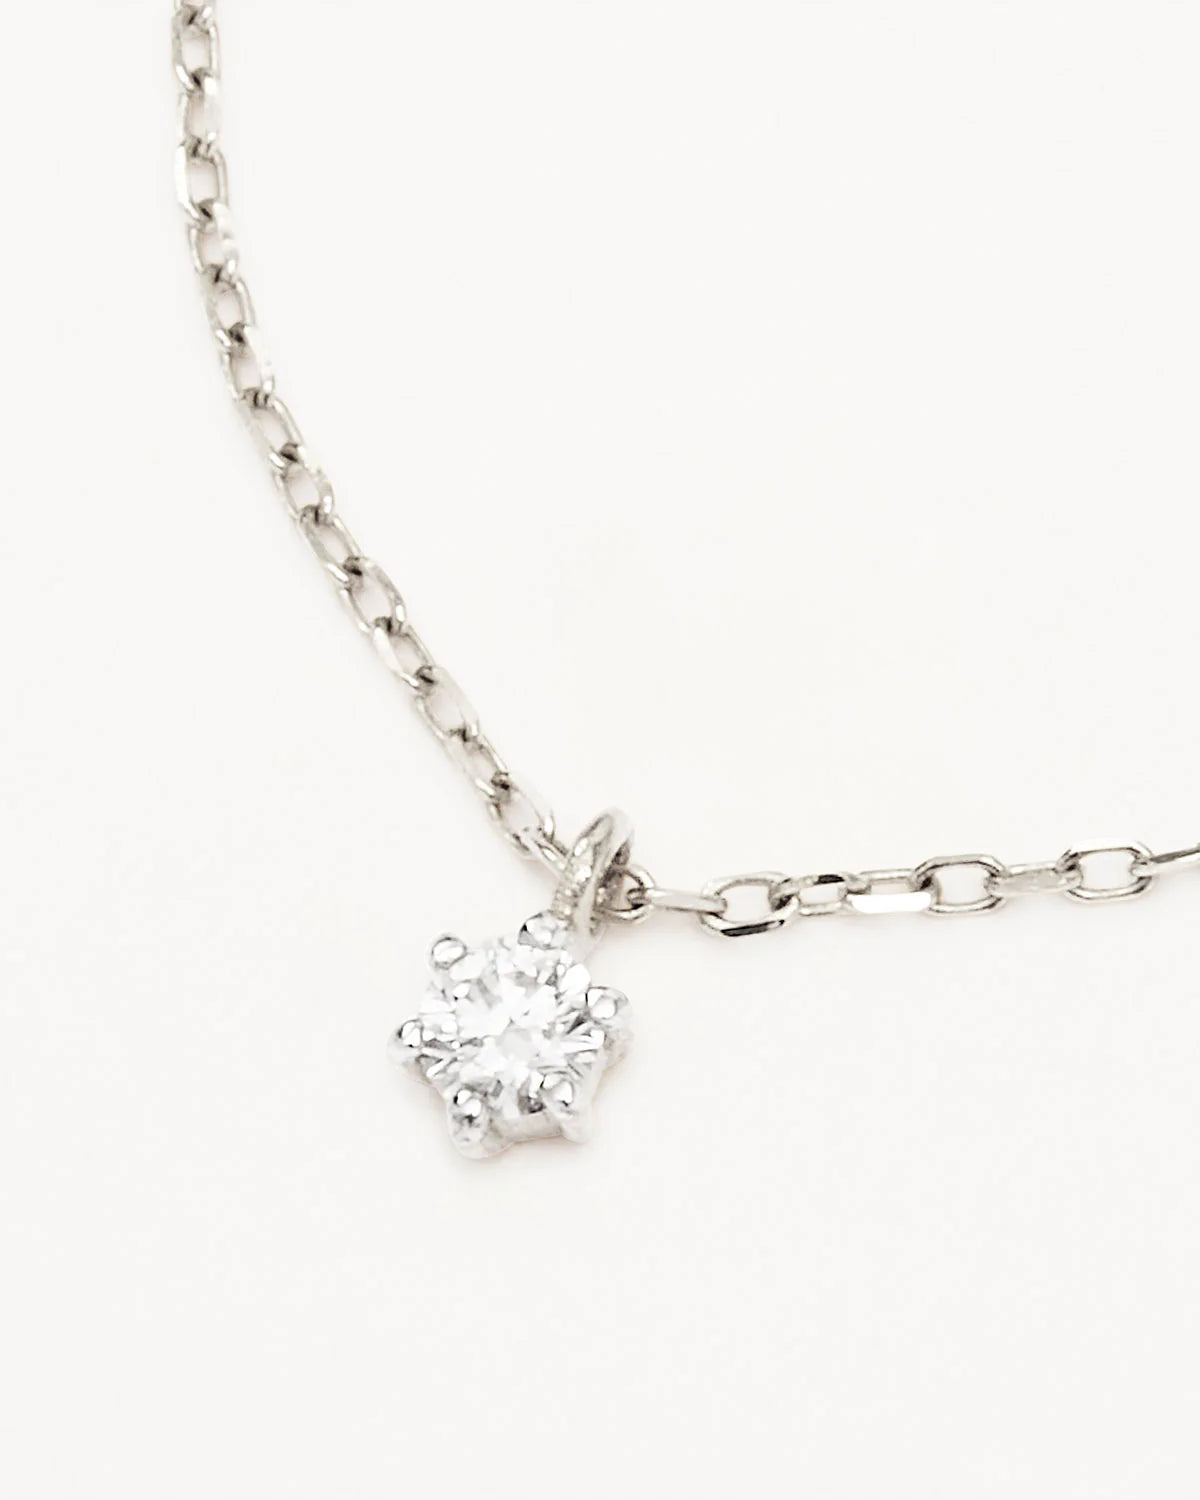 SWEET DROPLET DIAMOND NECKLACE - 14K WHITE GOLD